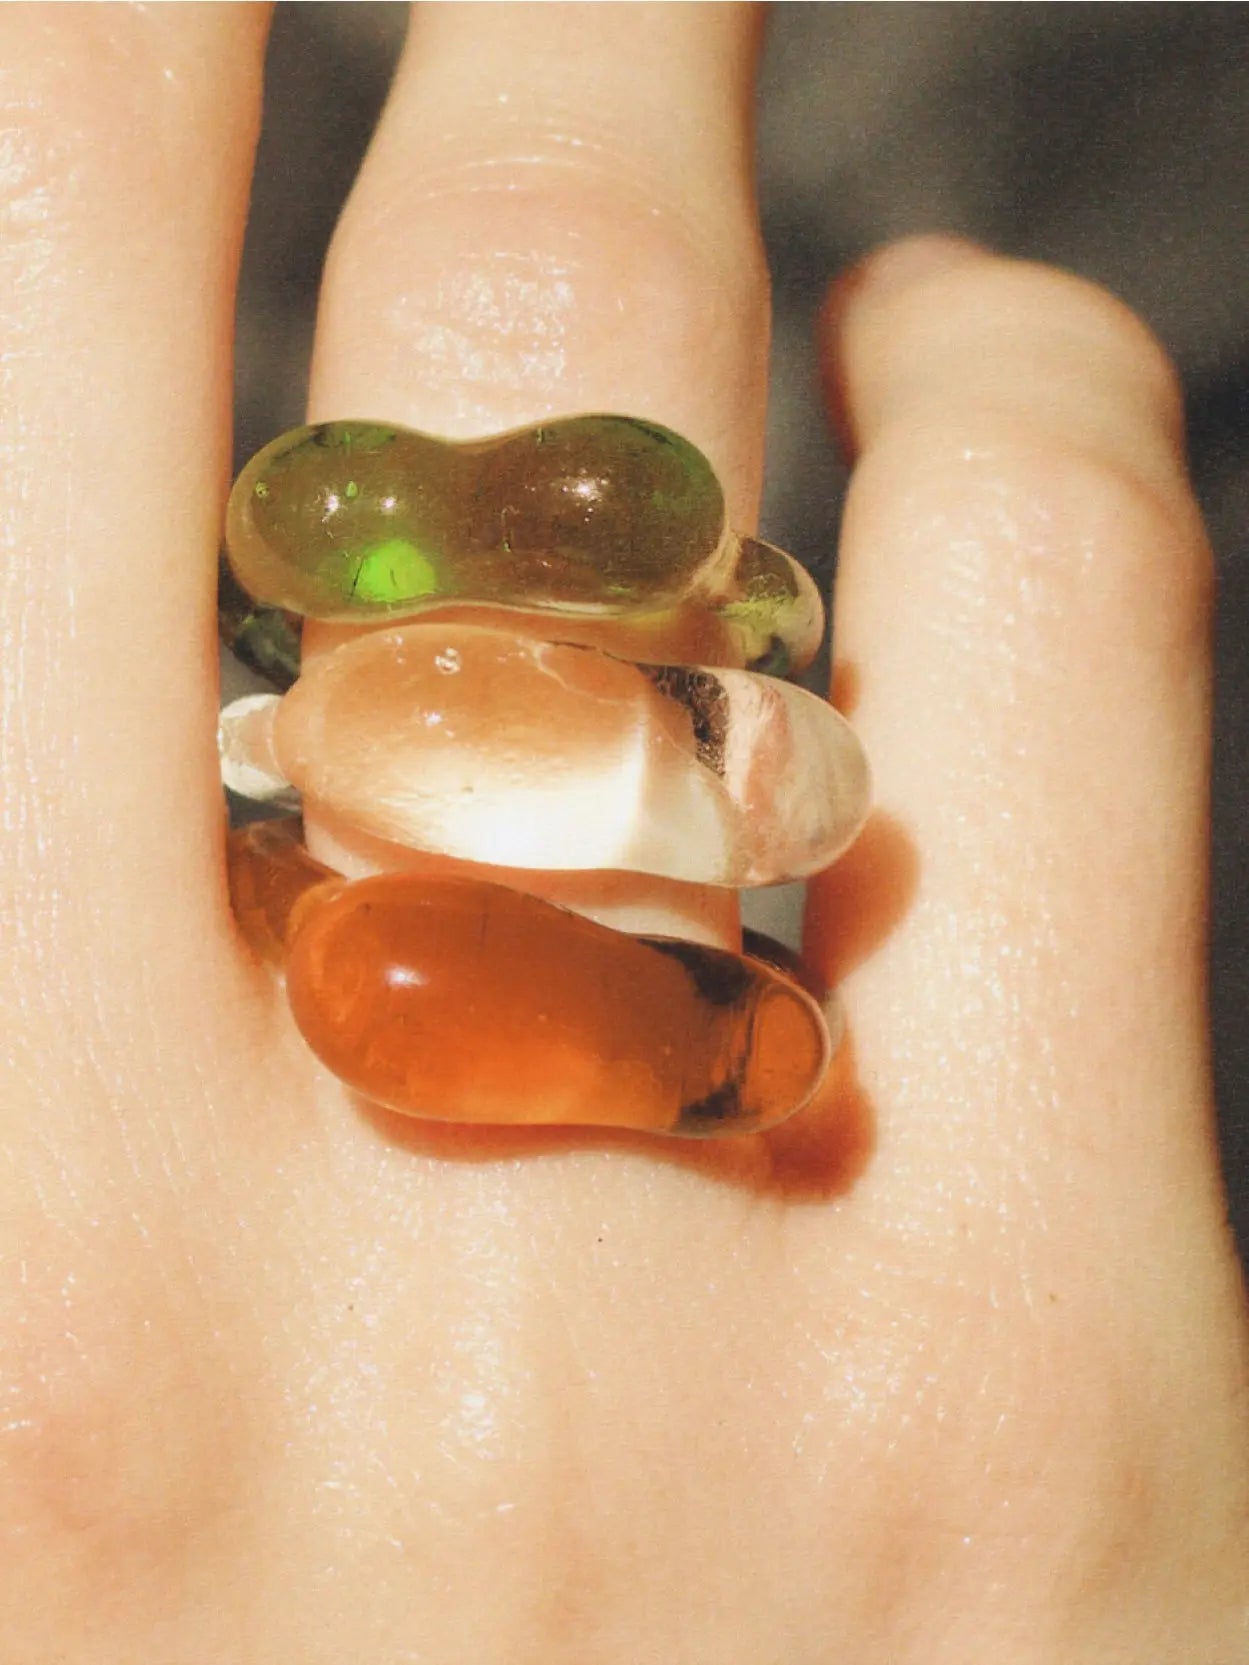 A translucent green ring with organic, bulbous shapes is placed on a plain white background. The design features a smooth finish with a glossy surface, creating a unique and artistic appearance, reminiscent of the avant-garde styles often found in Barcelona's boutique stores. The product is the Caju Ring Green by Nathalie Schreckenberg.